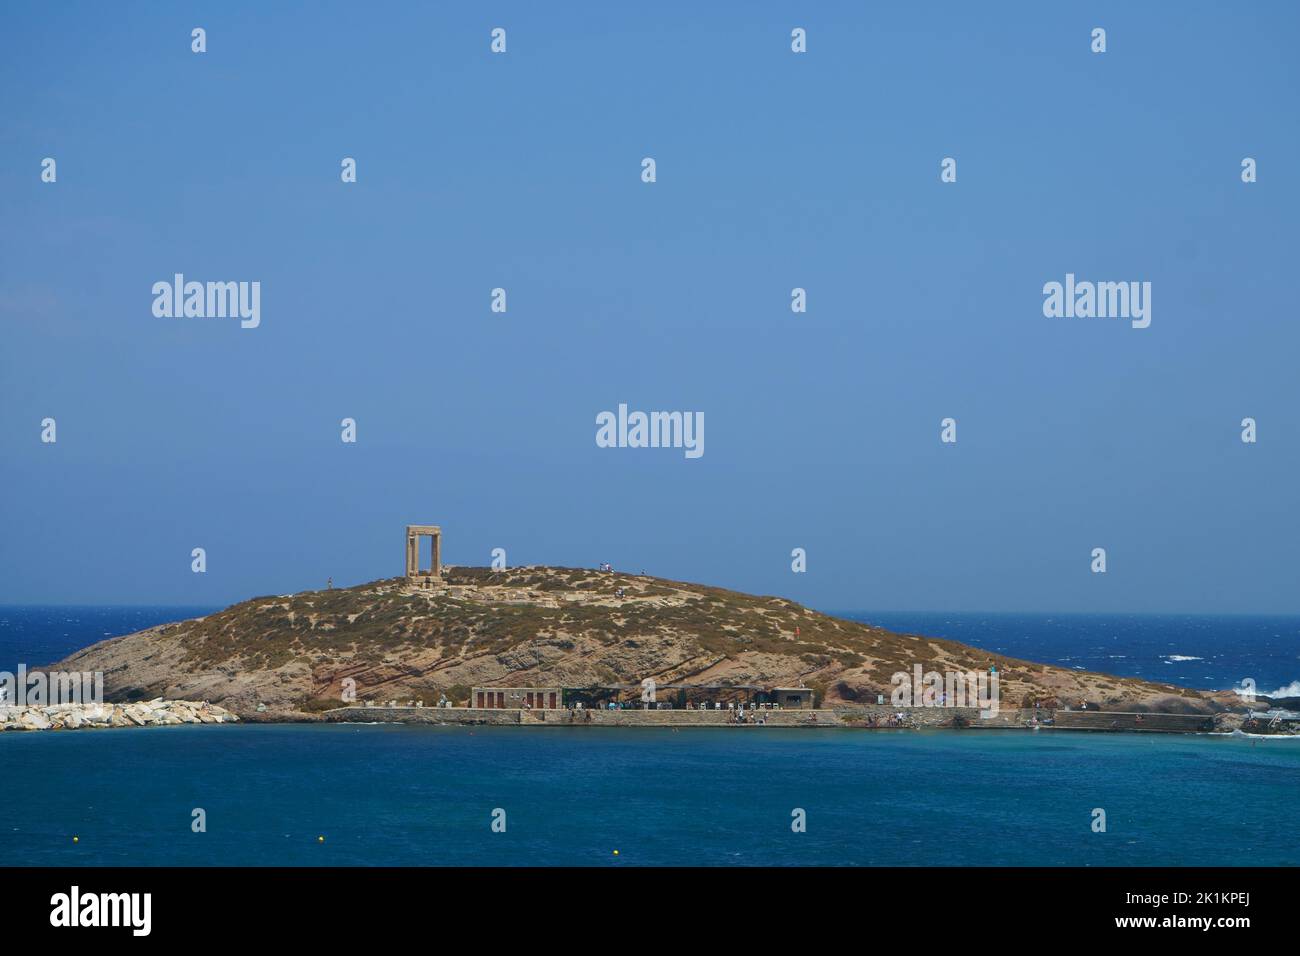 The Greek island of Naxos, Cyclades, in the Aegean Sea - Doorway of the ruins of the Temple of Apollo. Stock Photo